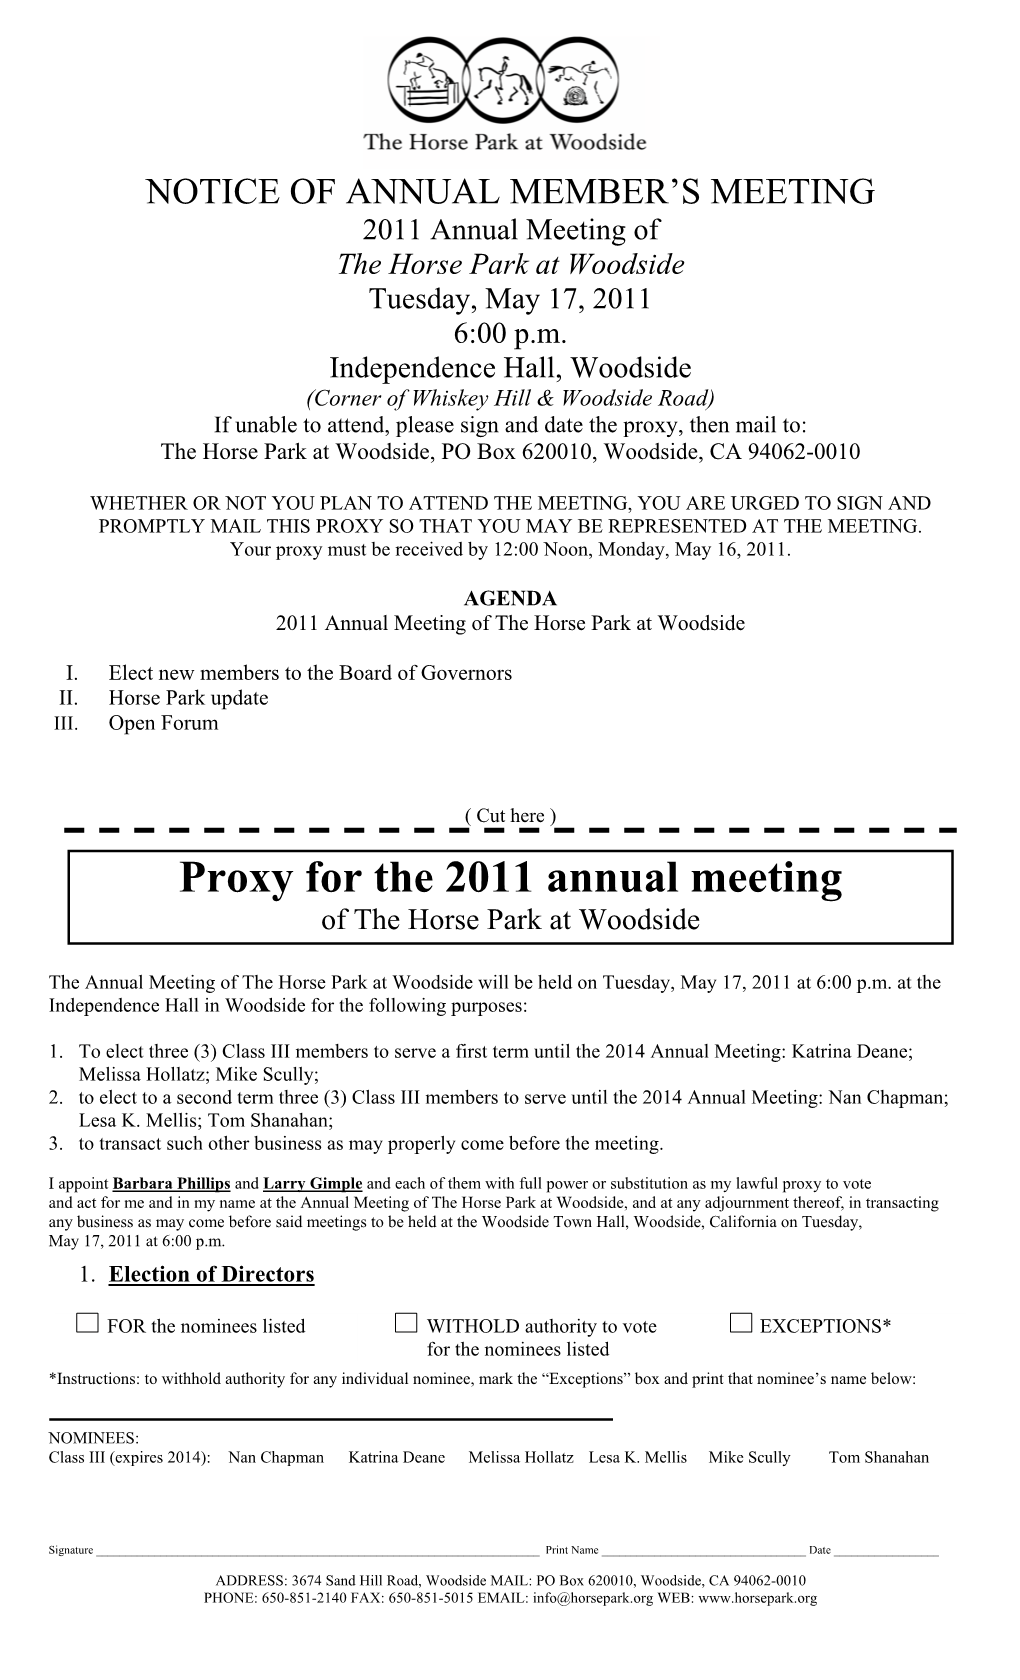 Proxy for the 2011 Annual Meeting of the Horse Park at Woodside